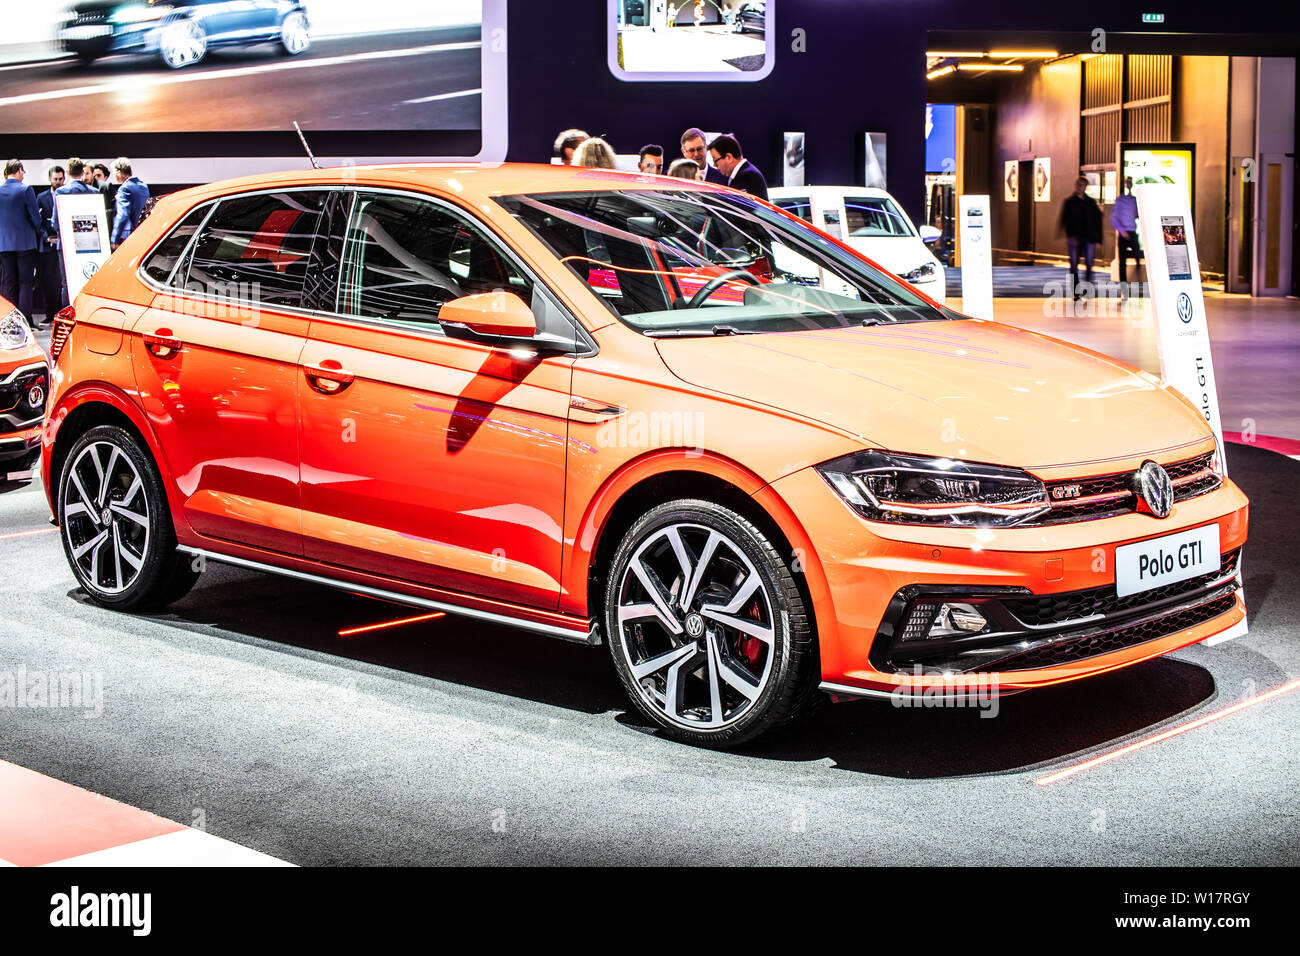 film easy to handle gene Brussels, Belgium, Jan 2019 red Volkswagen VW Polo GTI, Brussels Motor  Show, Sixth generation, Typ AW, MQB A0 platform, produced by Volkswagen  Stock Photo - Alamy